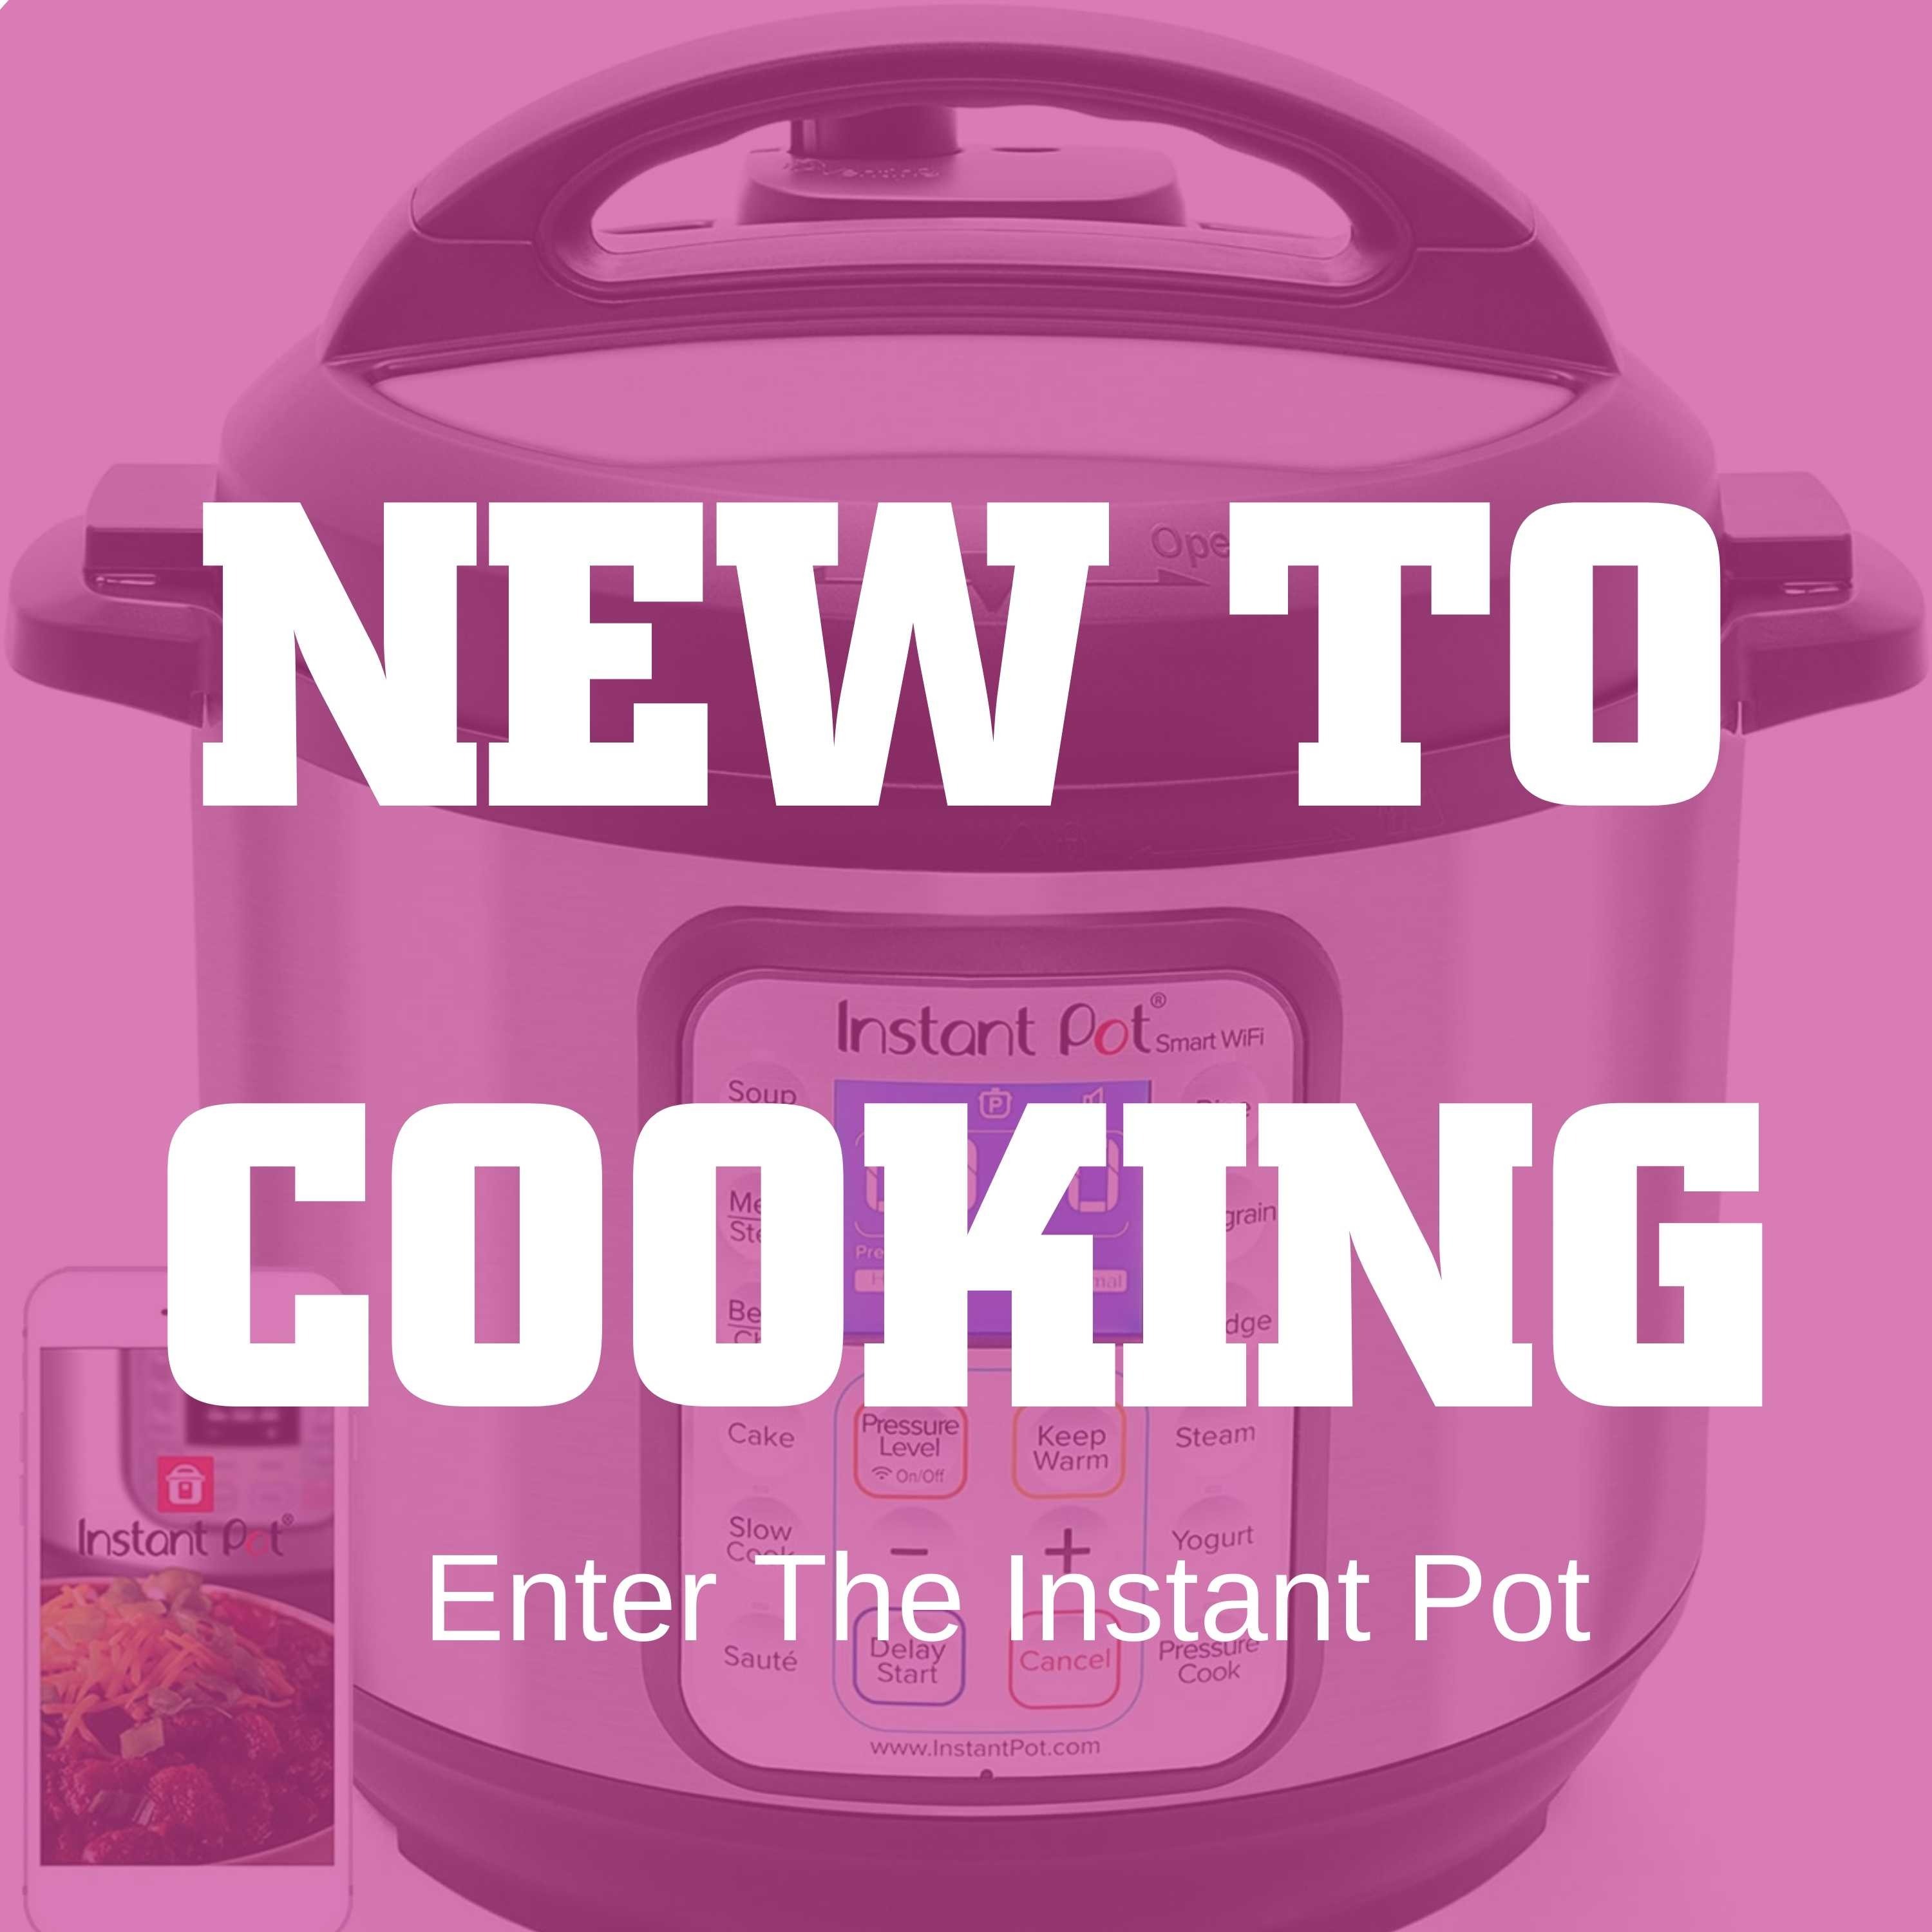 How Cool is the Instant Pot? (or is it Instapot ?) Image